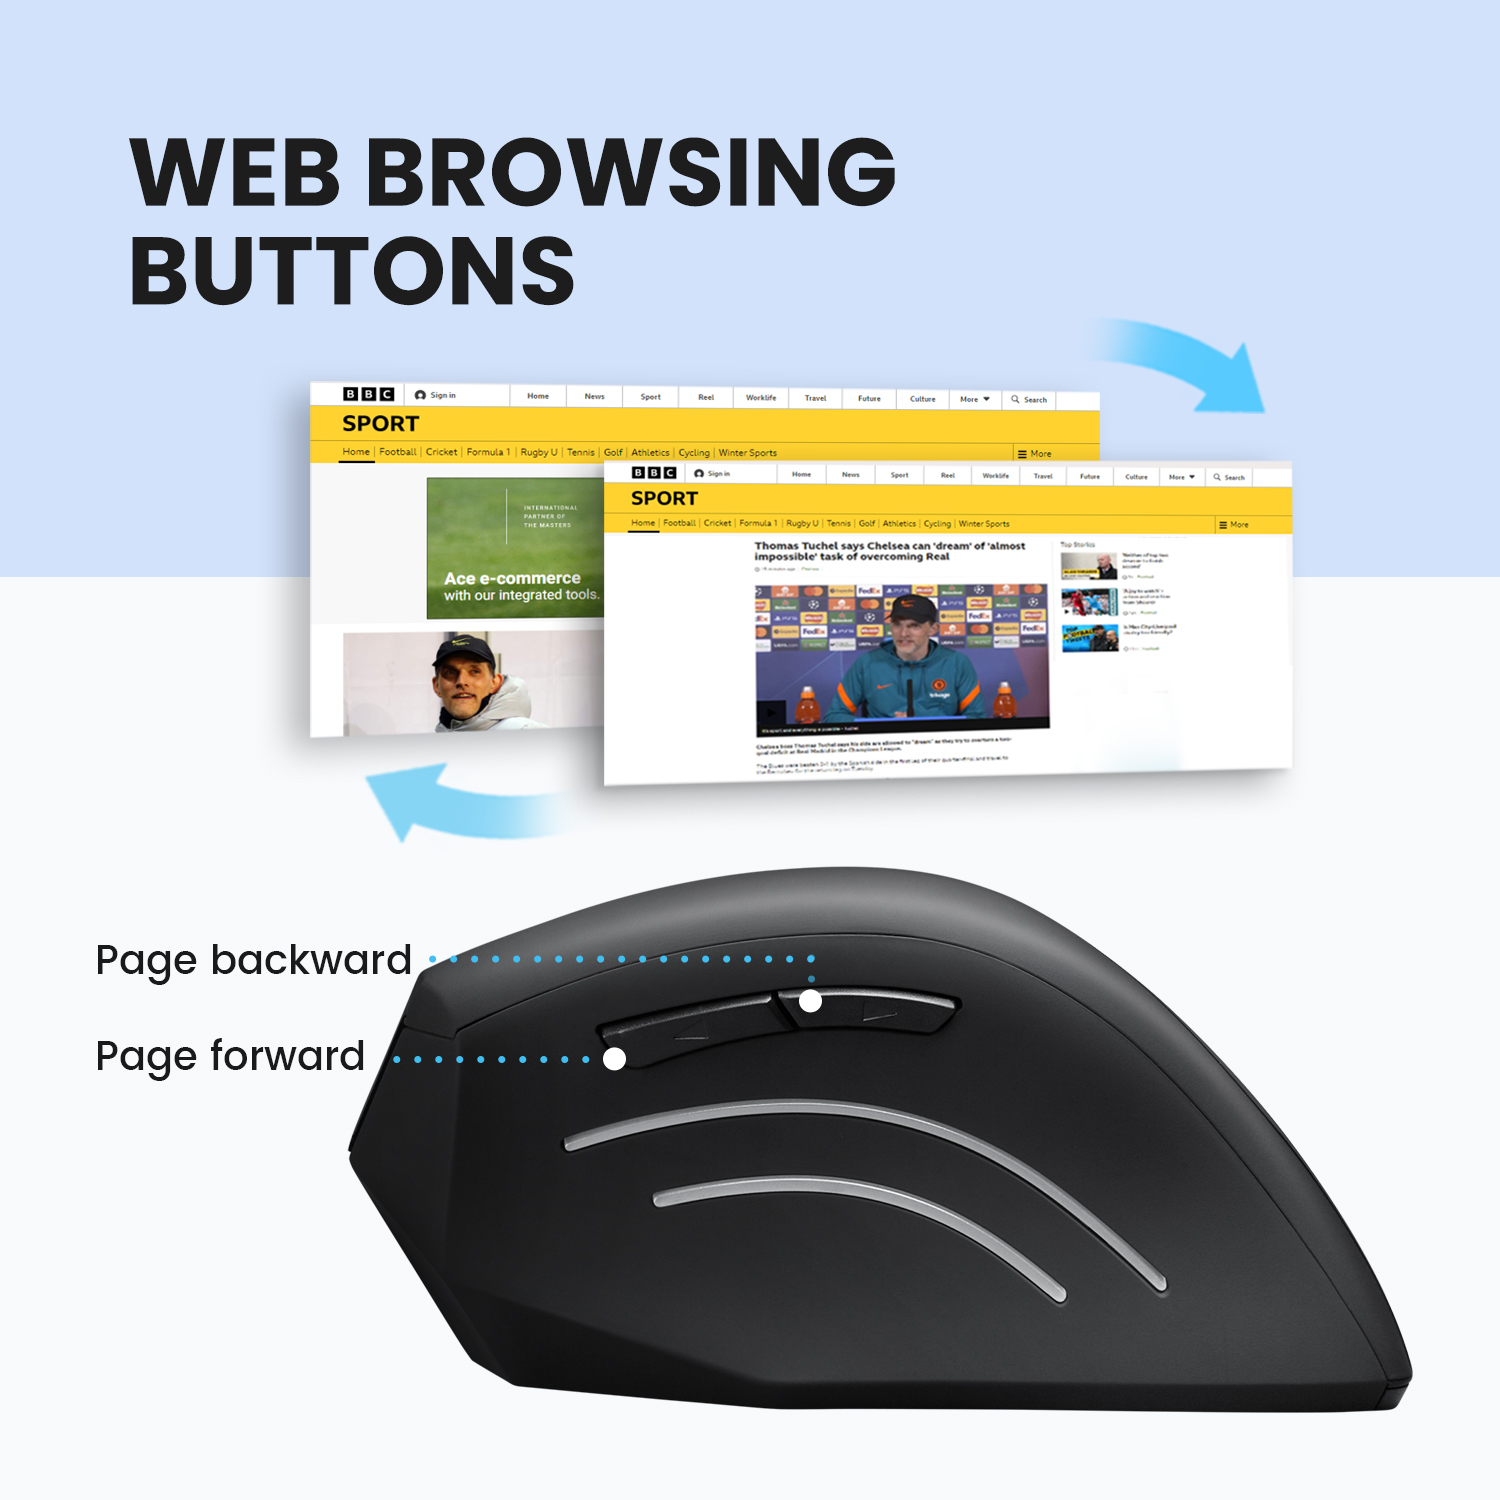  6 BUTTON DESIGN WITH EASY WEB PAGE NAVIGATION